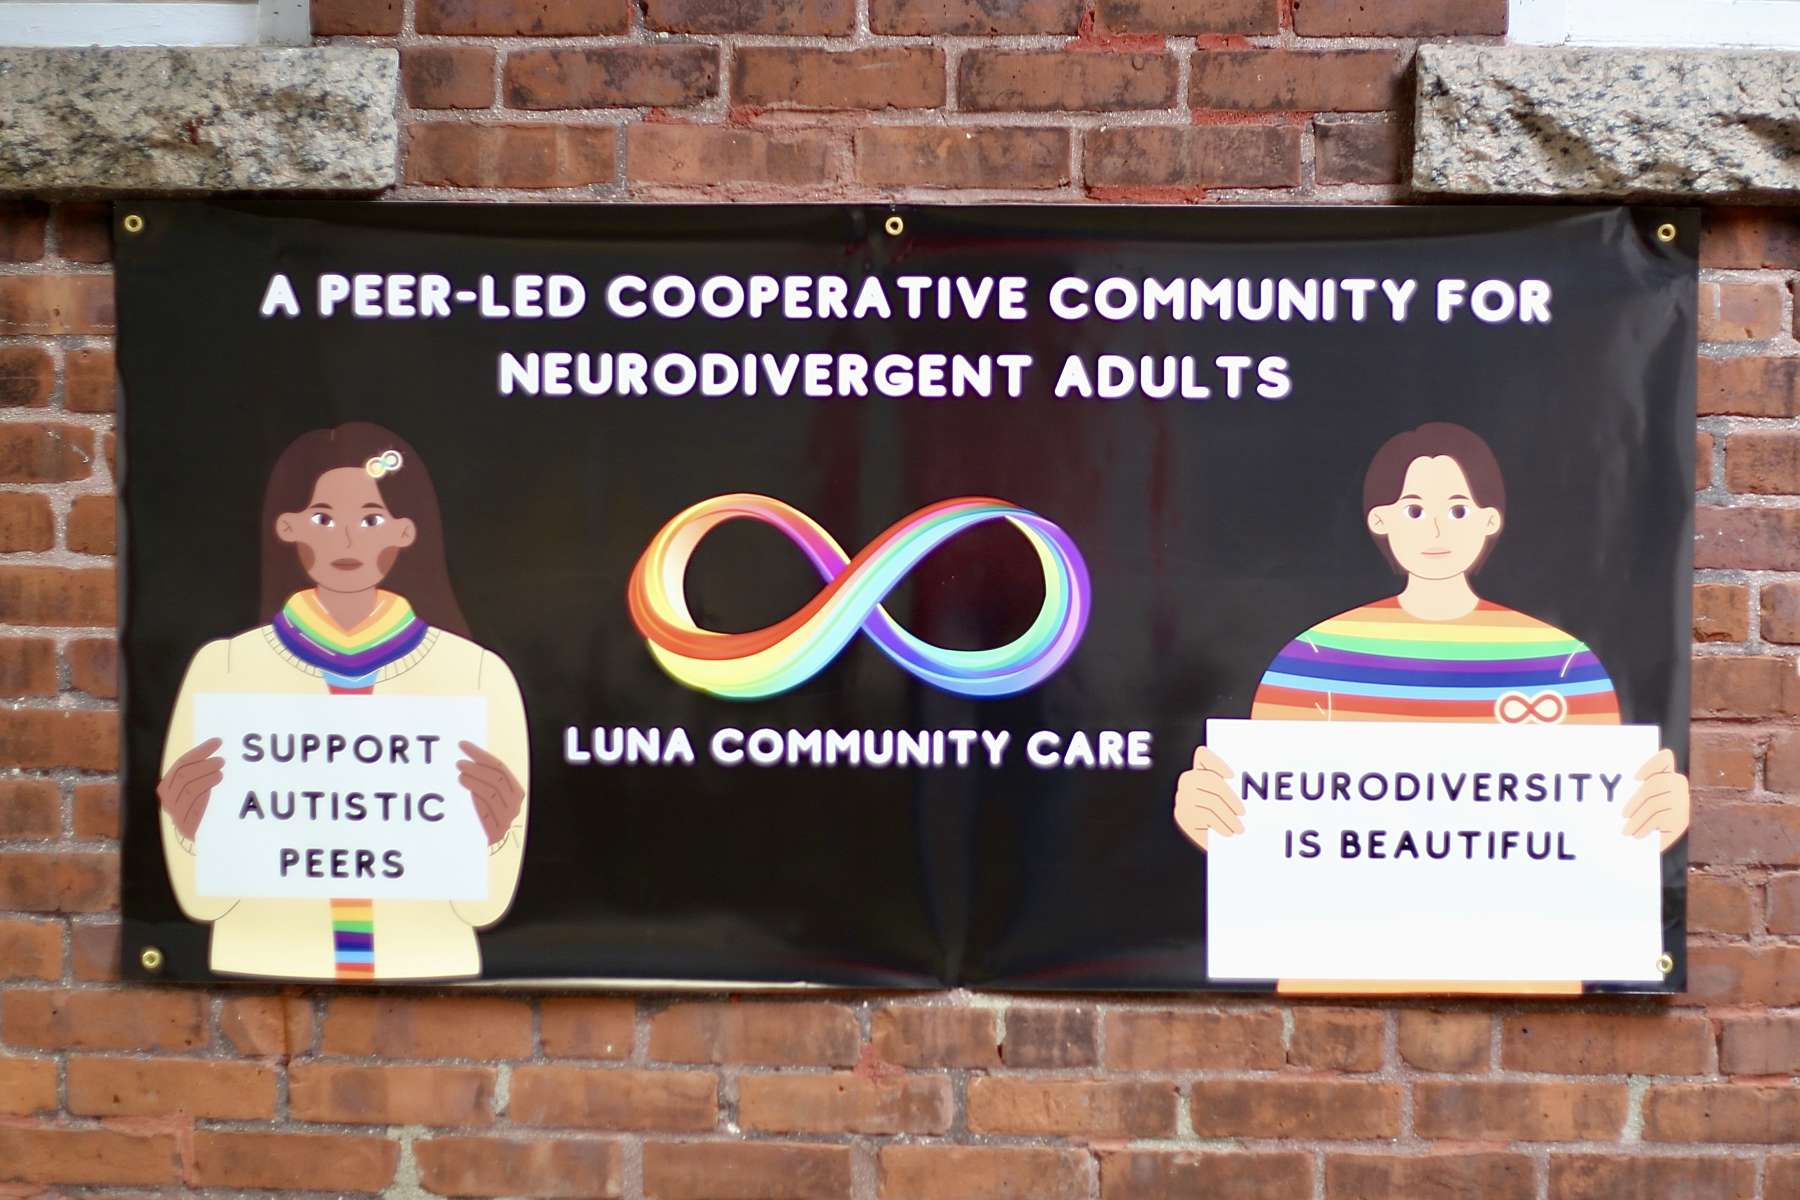 Rhode Island News: LUNA Community Care to provide services to neurodivergent and disabled adults